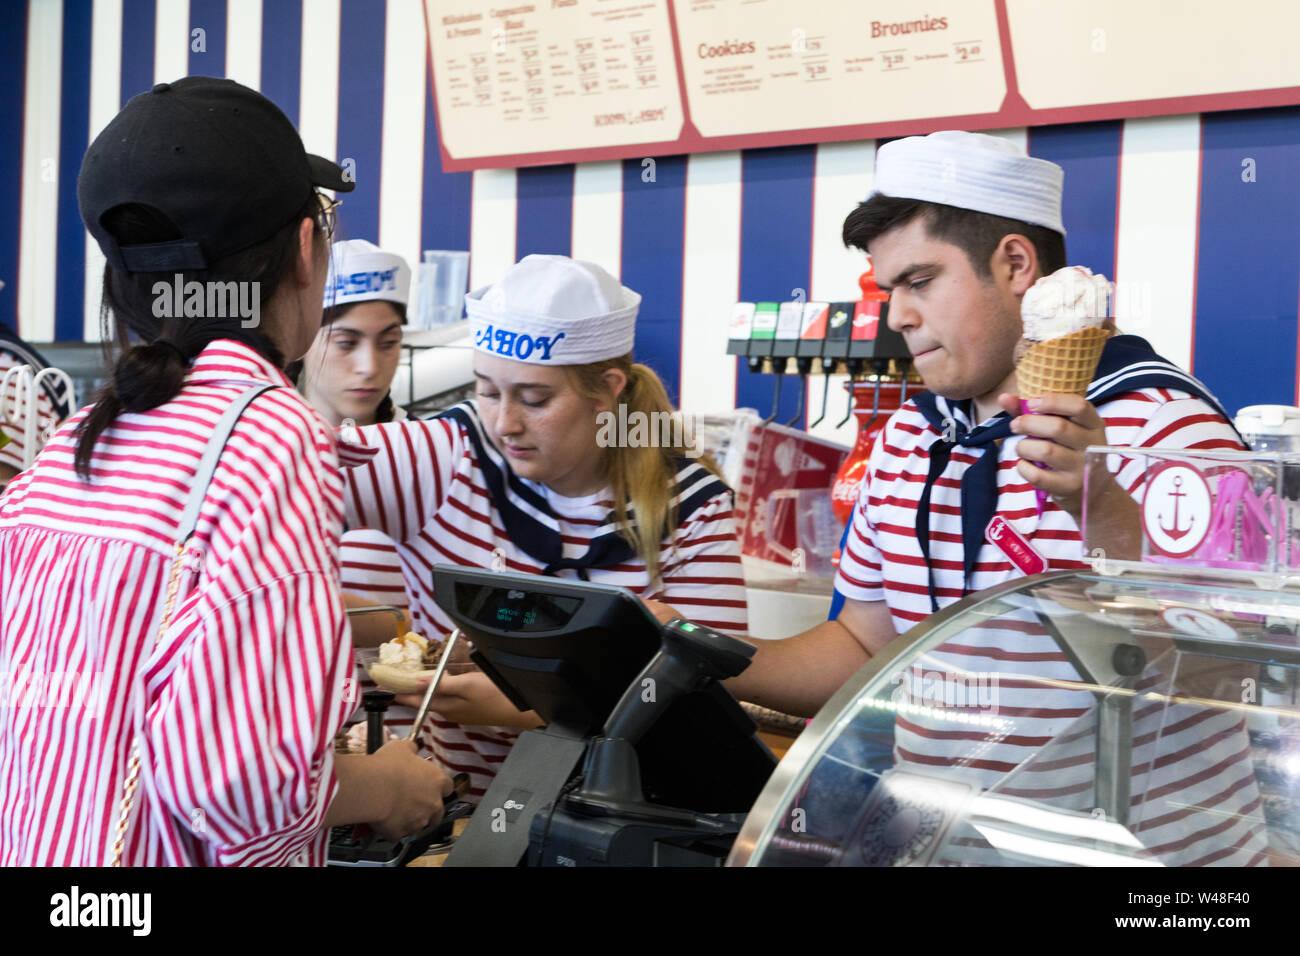 Burbank California Usa July 14 2019 Netflix Stranger Things Season 3 Scoops Ahoy Pop Up Store At Baskin Robbins On Their Last Day Stock Photo Alamy - roblox how to get the scoops ahoy hat youtube